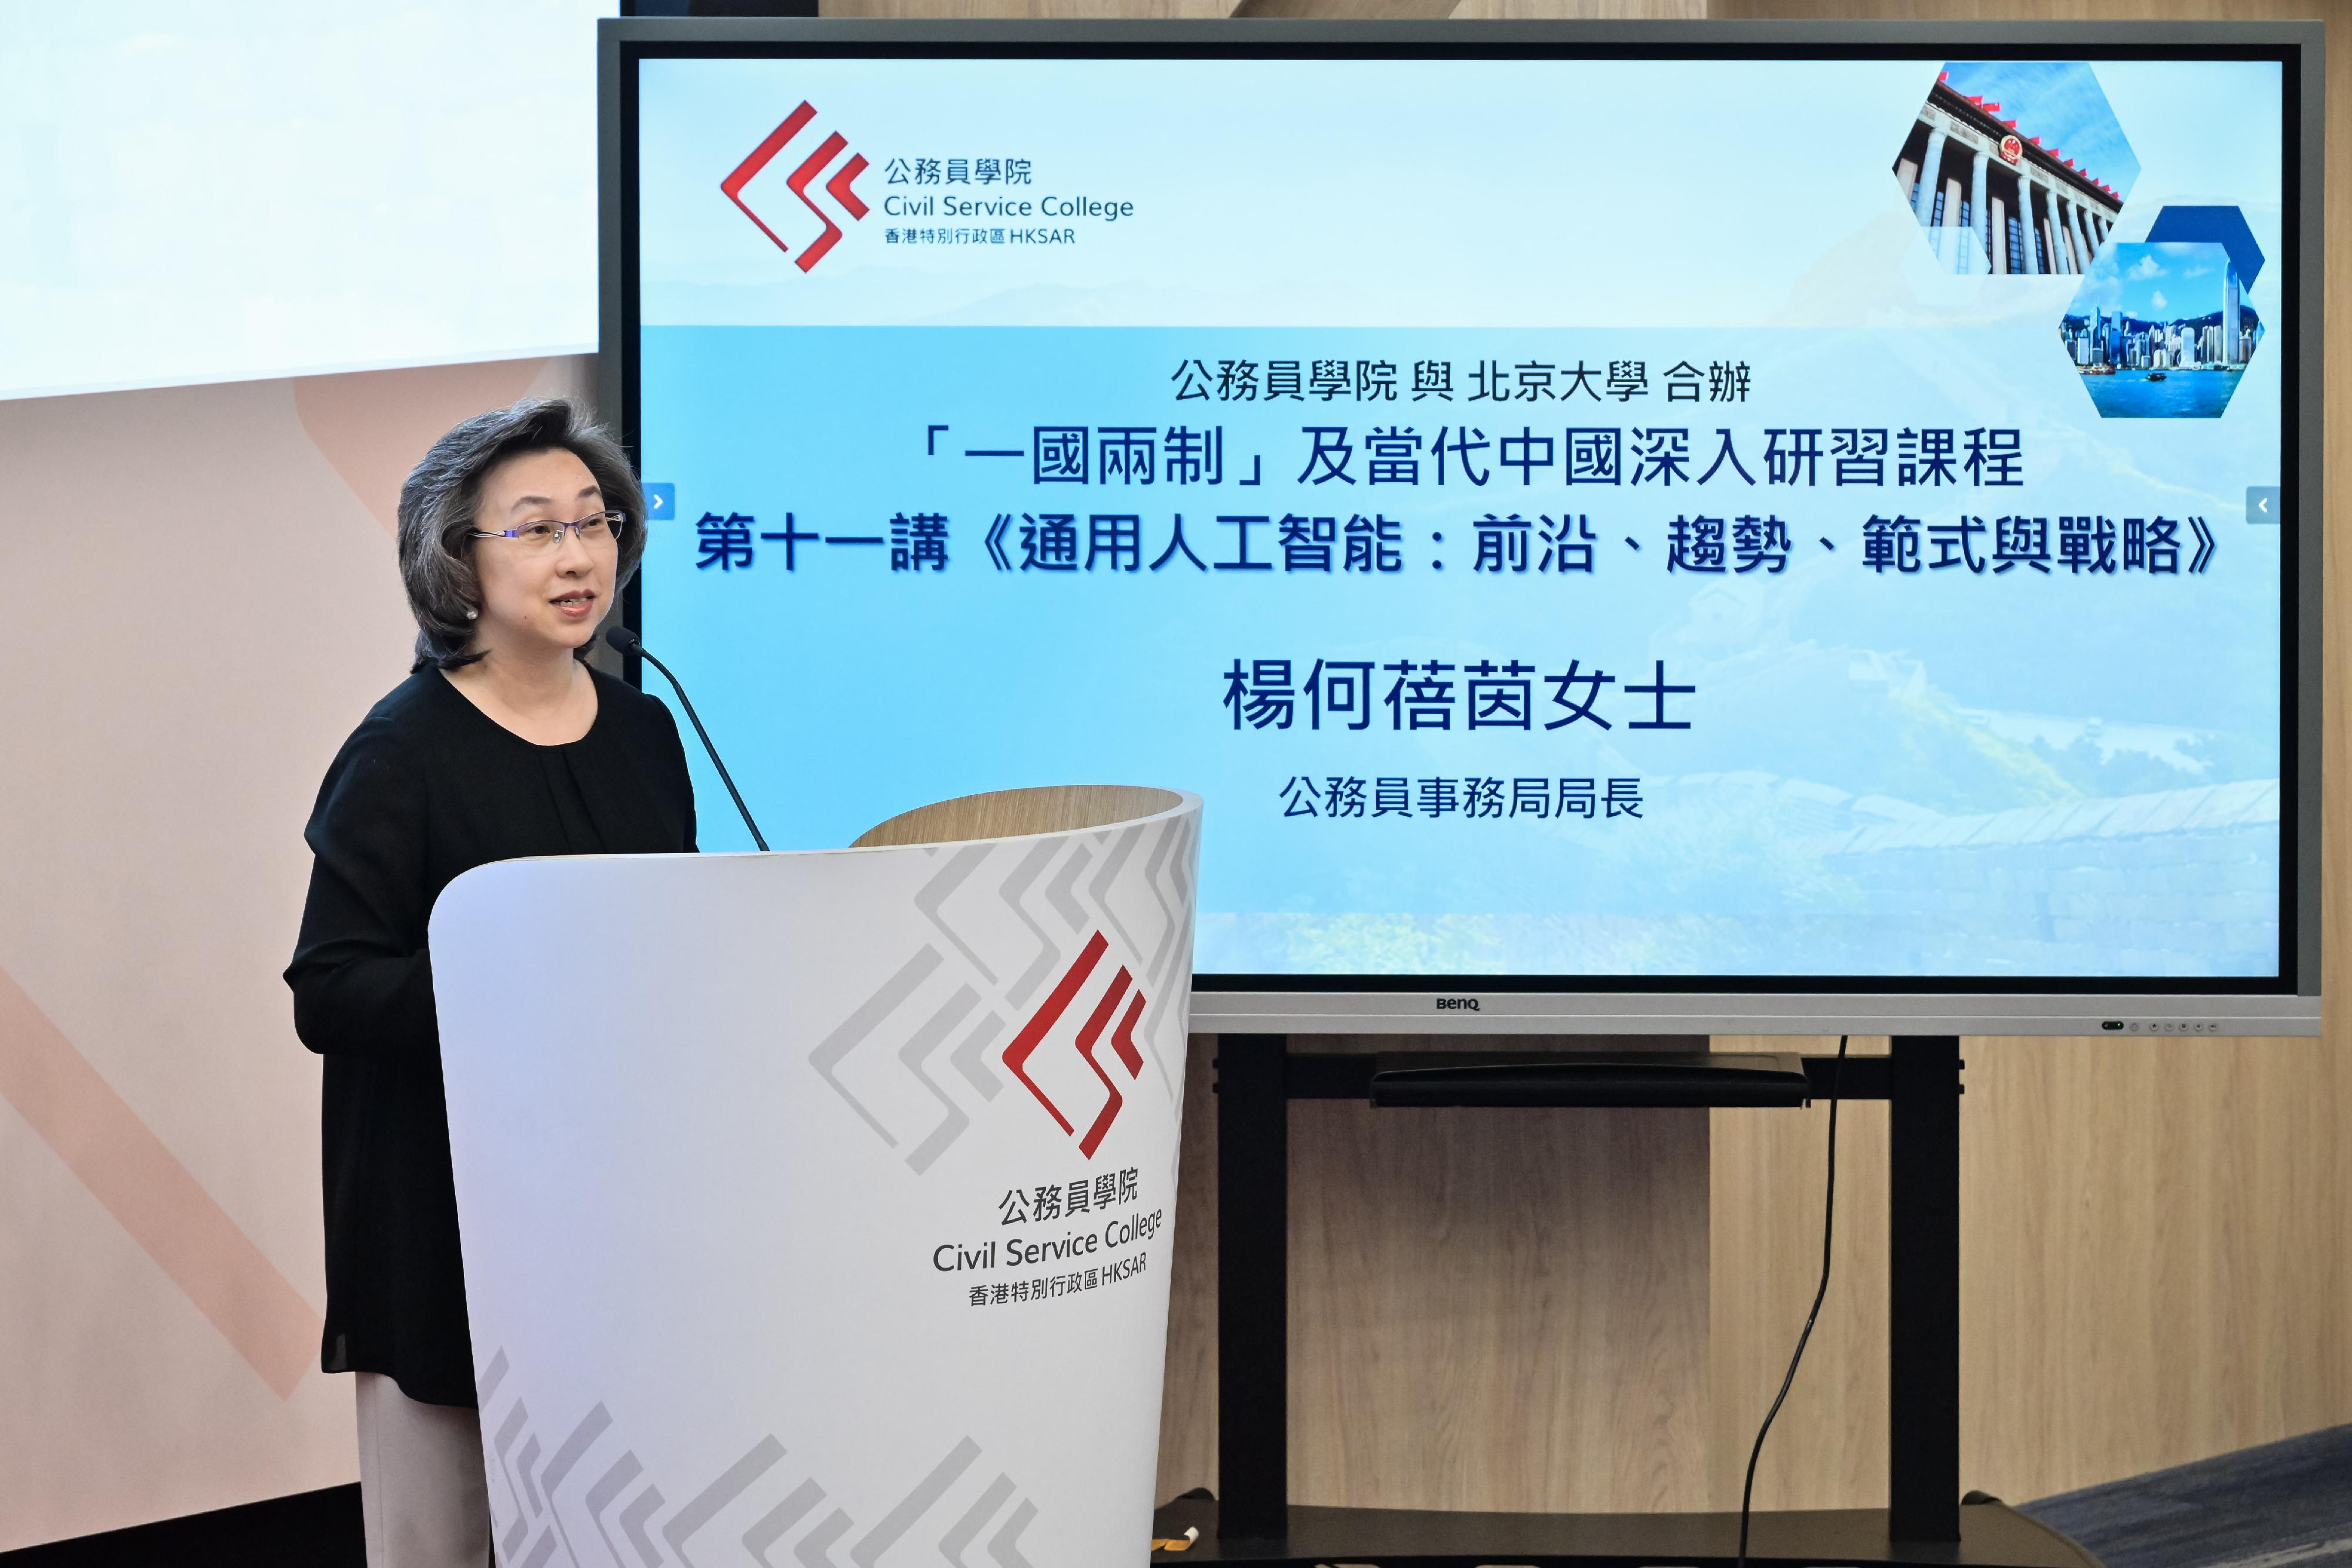 The Civil Service College (CSC), in collaboration with the Institute for Hong Kong and Macau Studies, Peking University, launched an in-depth programme on "one country, two systems" and contemporary China. As part of the programme, a lecture on the topic of "Artificial General Intelligence: Frontiers, Trends, Paradigm, and Strategy" was held at the CSC today (May 21). Photo shows the Secretary for the Civil Service, Mrs Ingrid Yeung, delivering a speech at the lecture.